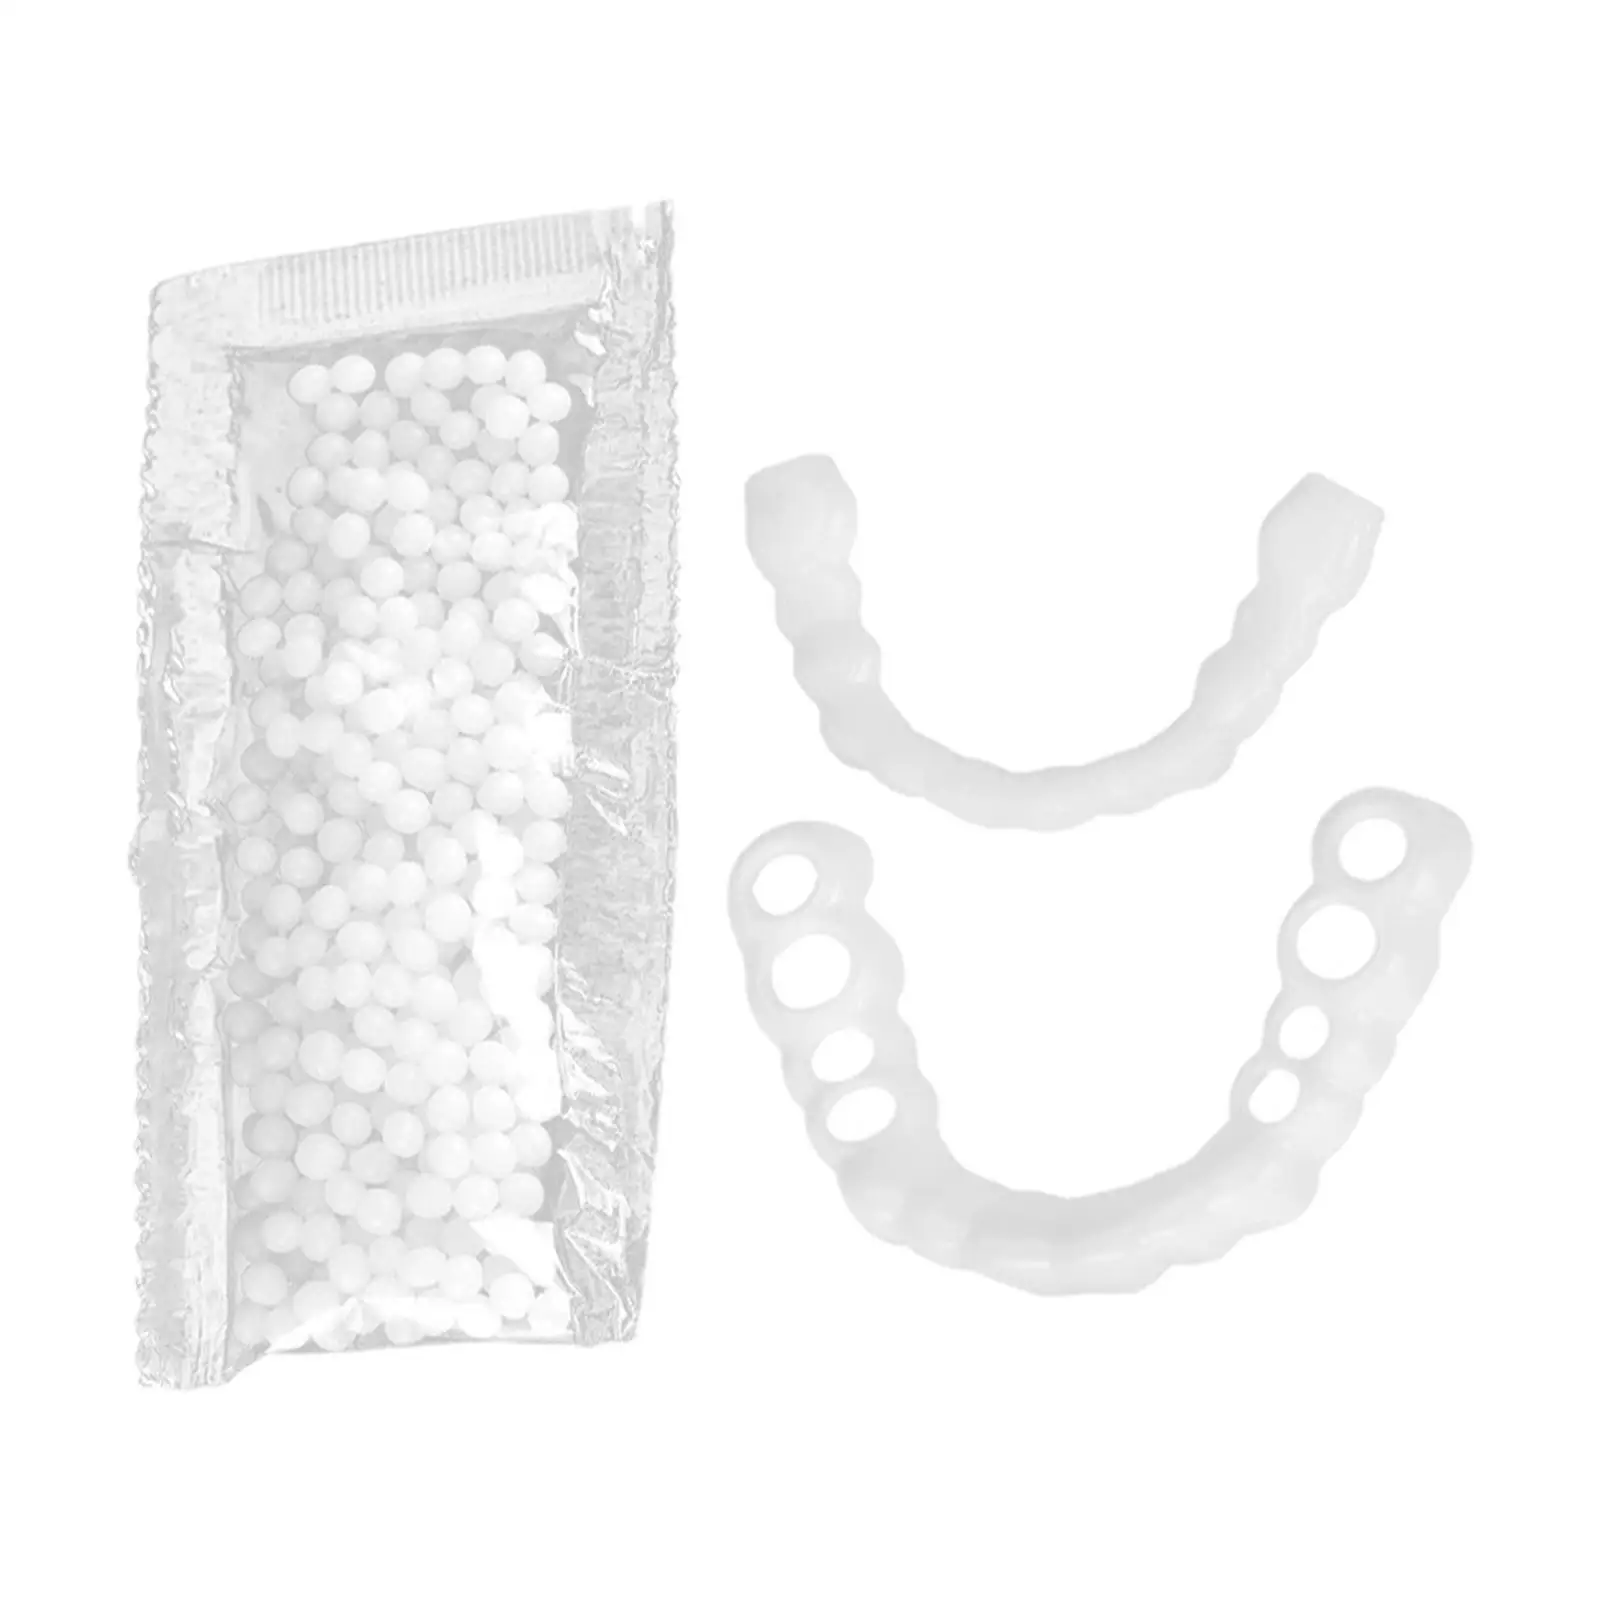 Upper Lower False Teeth Covers Set Veneers Denture Simulation Cover White Fake Tooth Covers for Whitening Cosmetic Teeth Smile